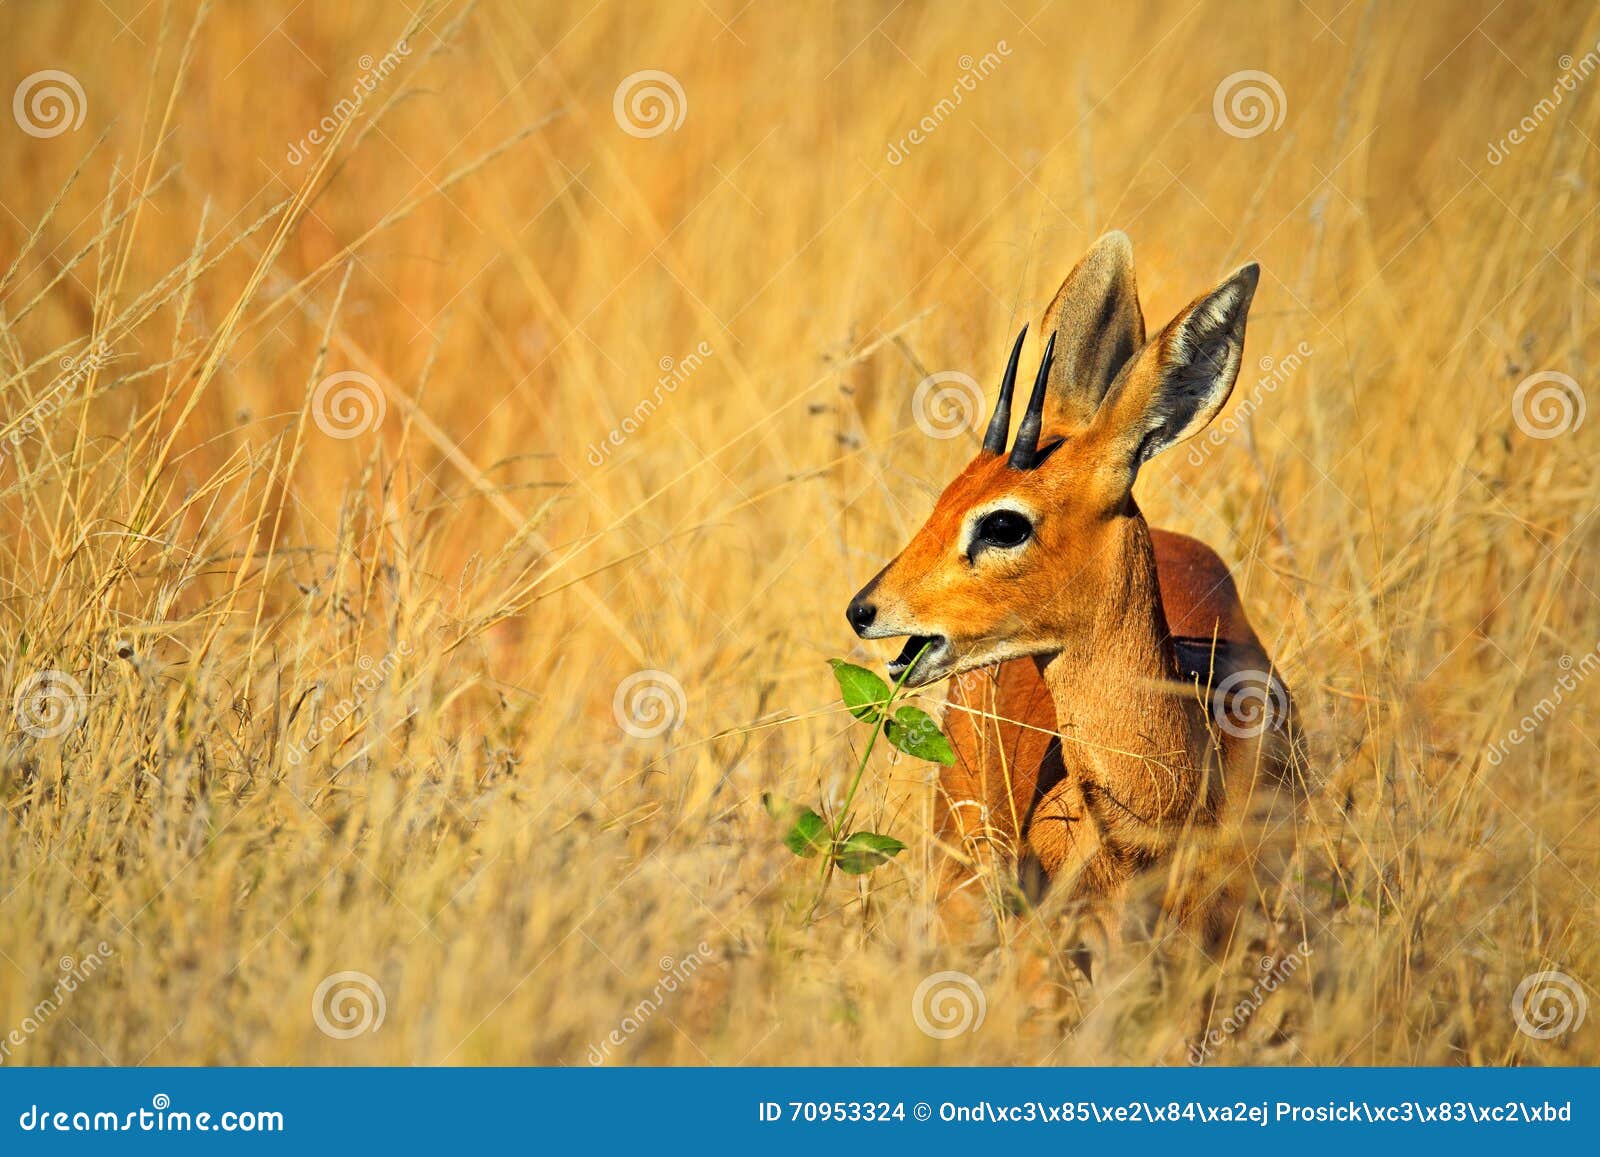 steenbok, raphicerus campestris, with green leaves in the muzzle, grass nature habitat, hwange national park, zimbabwe